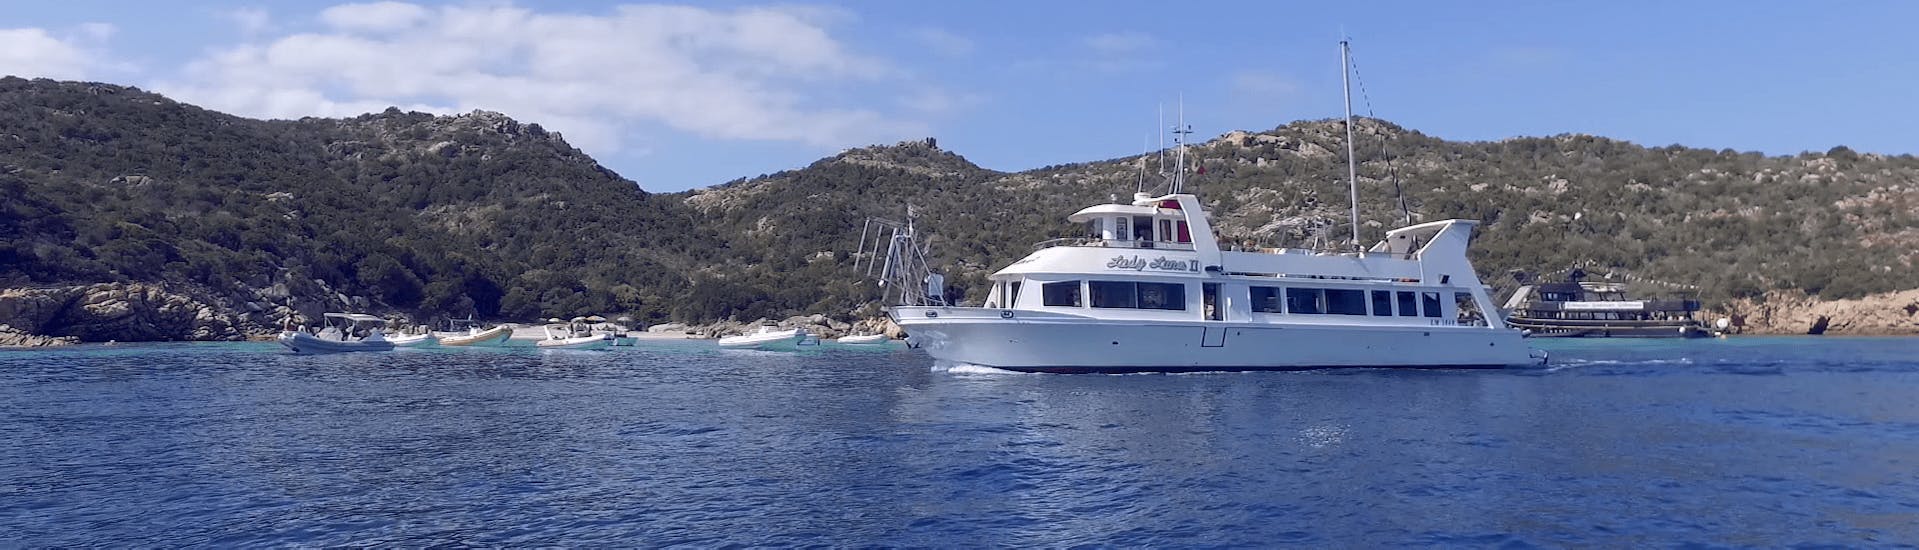 Our boat is crusing through the islands of the La Maddalena Archipelago. 